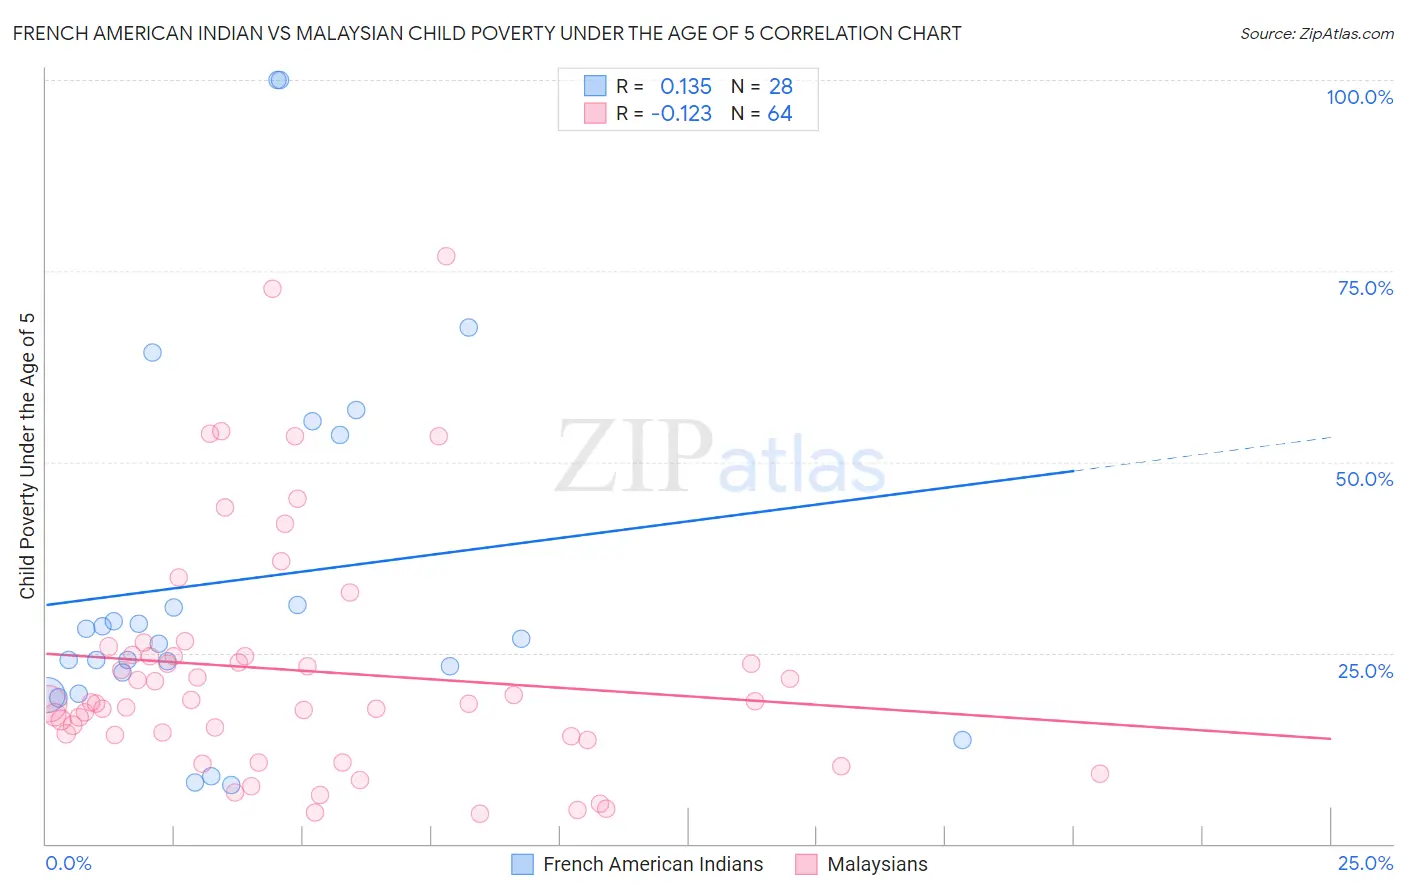 French American Indian vs Malaysian Child Poverty Under the Age of 5